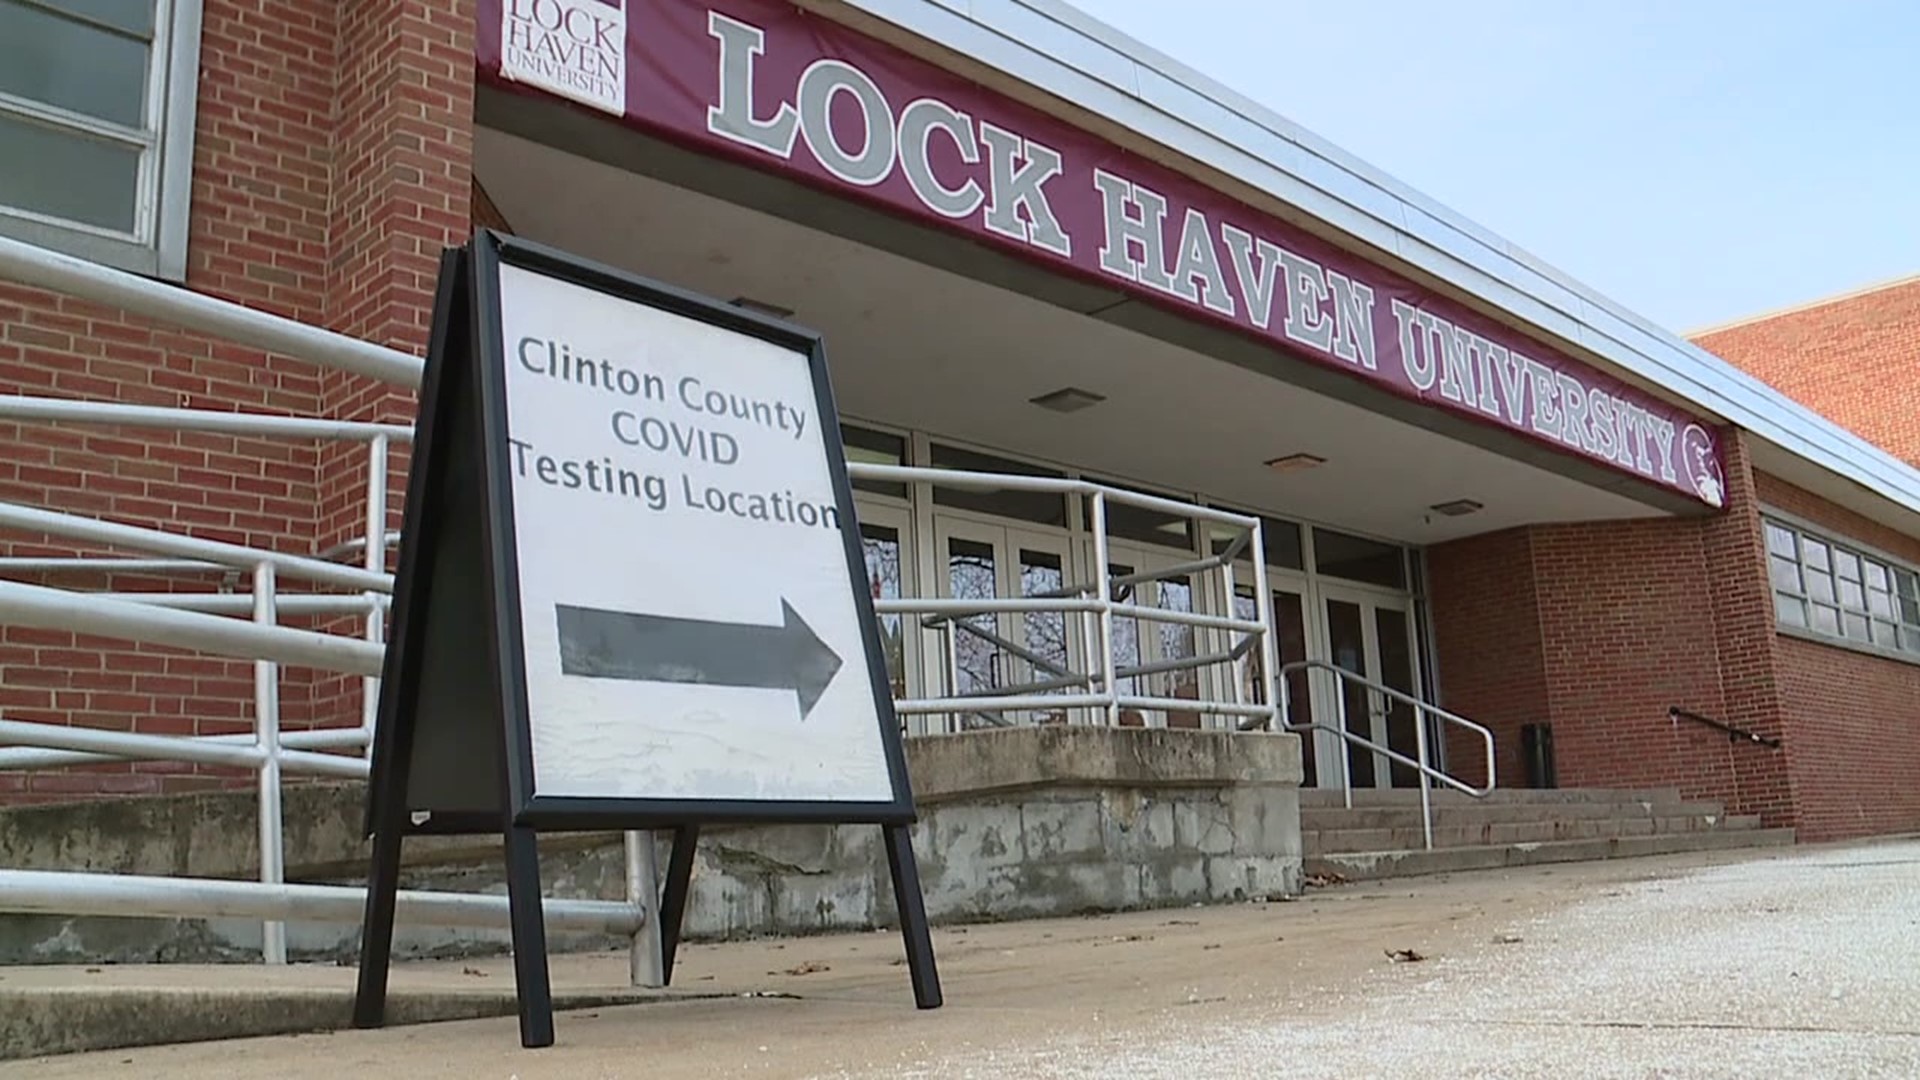 A COVID-19 test site in Clinton County is urging more folks to use its services.